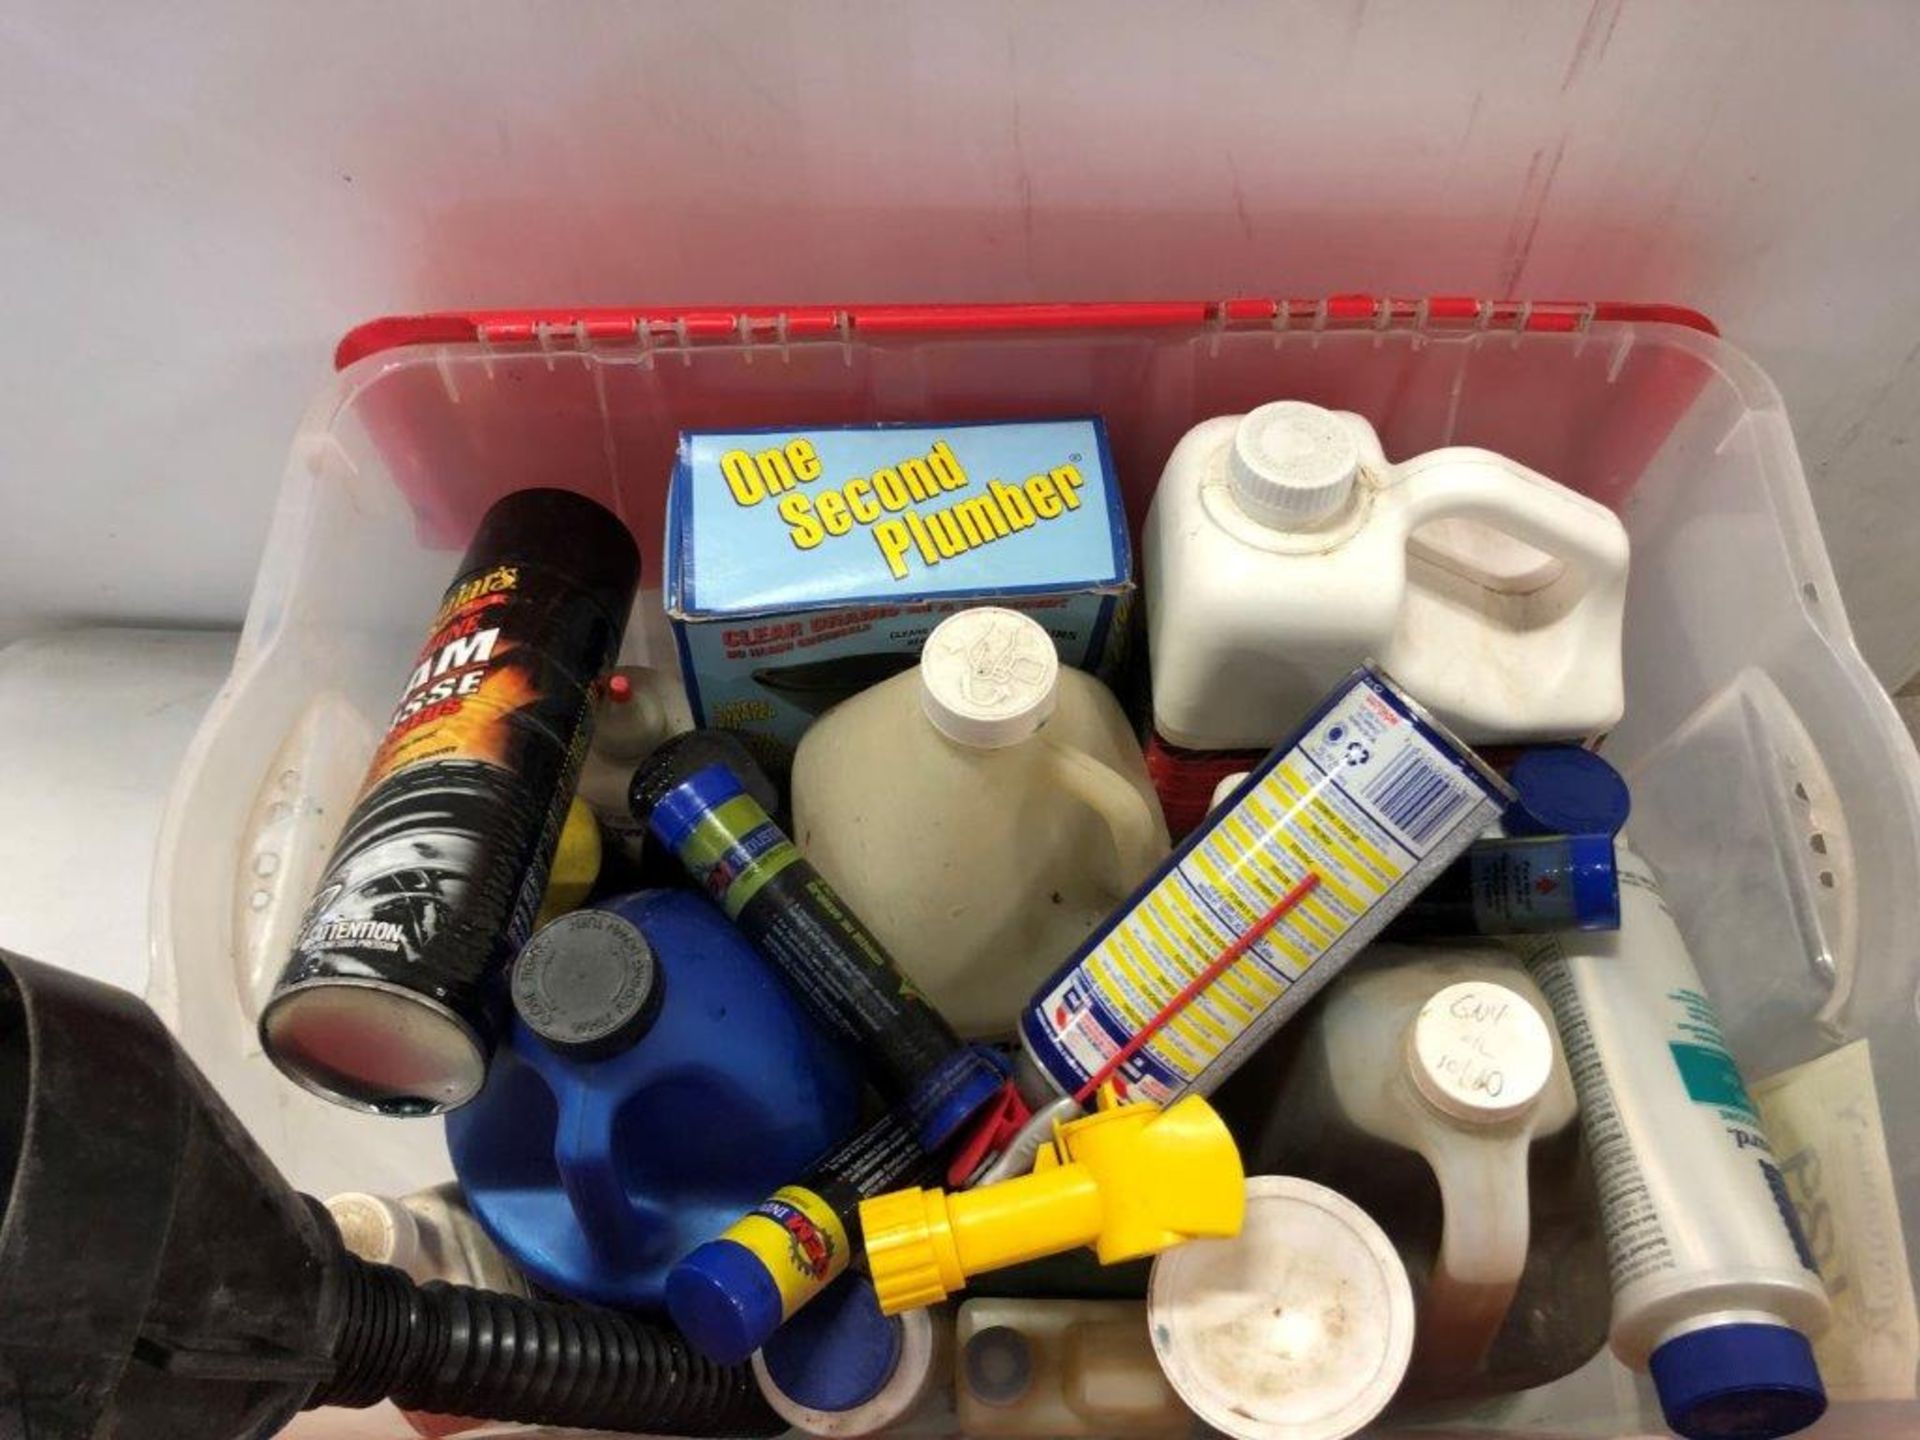 L/O ASSORTED OILS, FLUIDS, CHEMICAL - SPA ANTI FOAM, ONE SECOND PLUMBER, POLY FUNNEL, WD-40, ETC. - Image 2 of 2